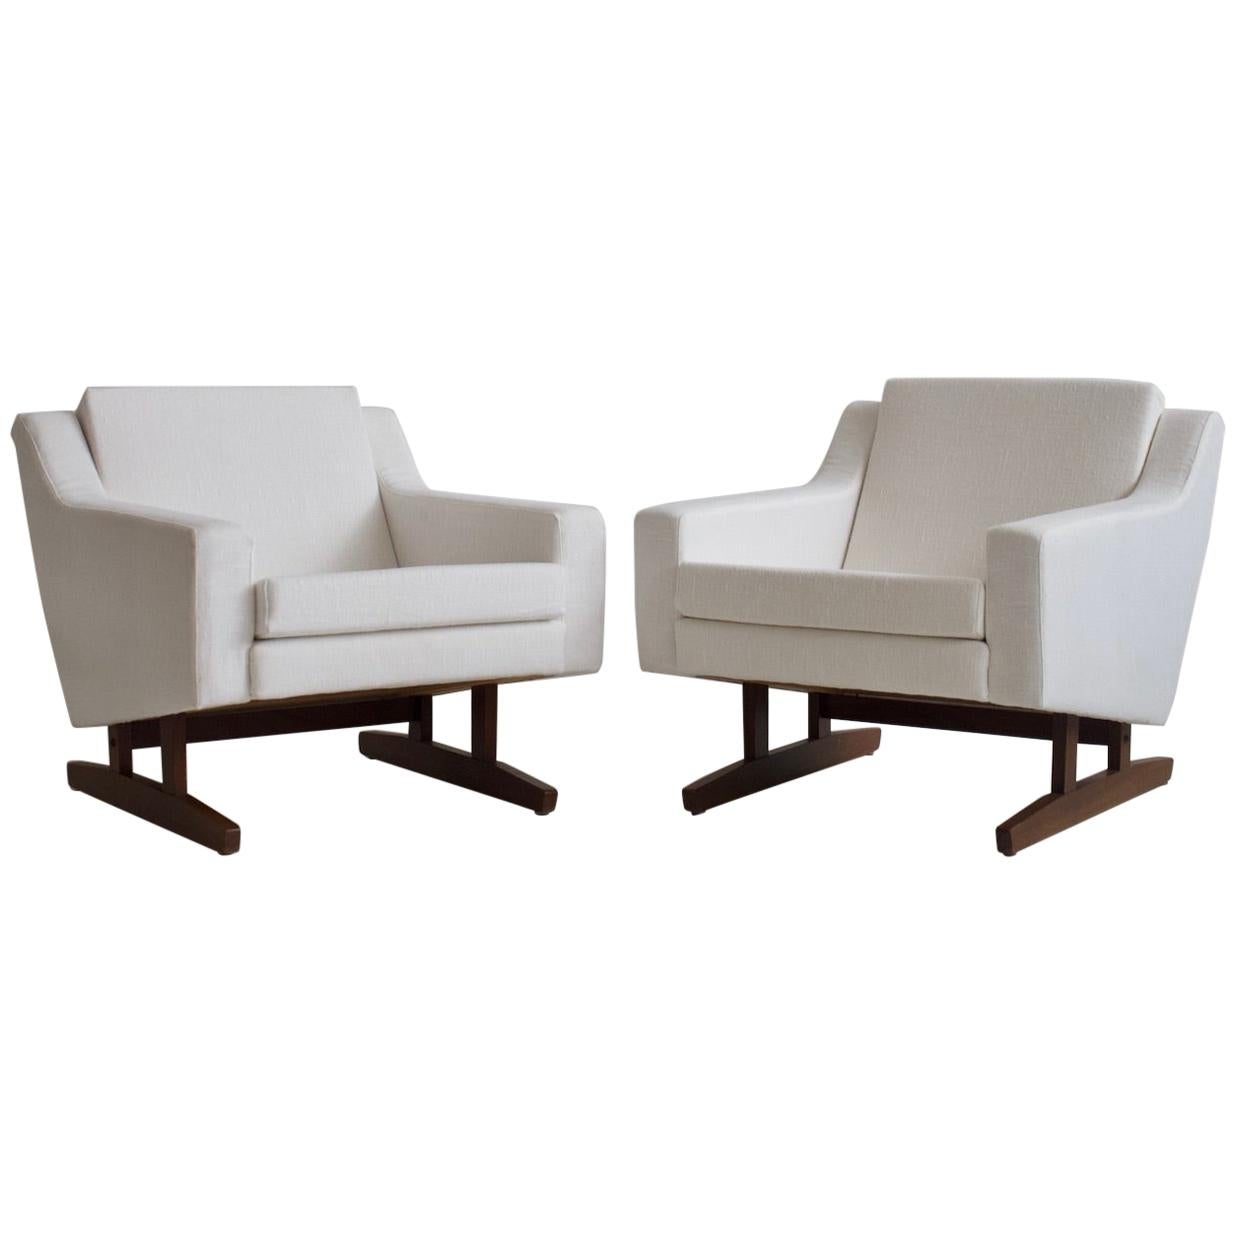 Pair of White Armchairs with Teak Legs